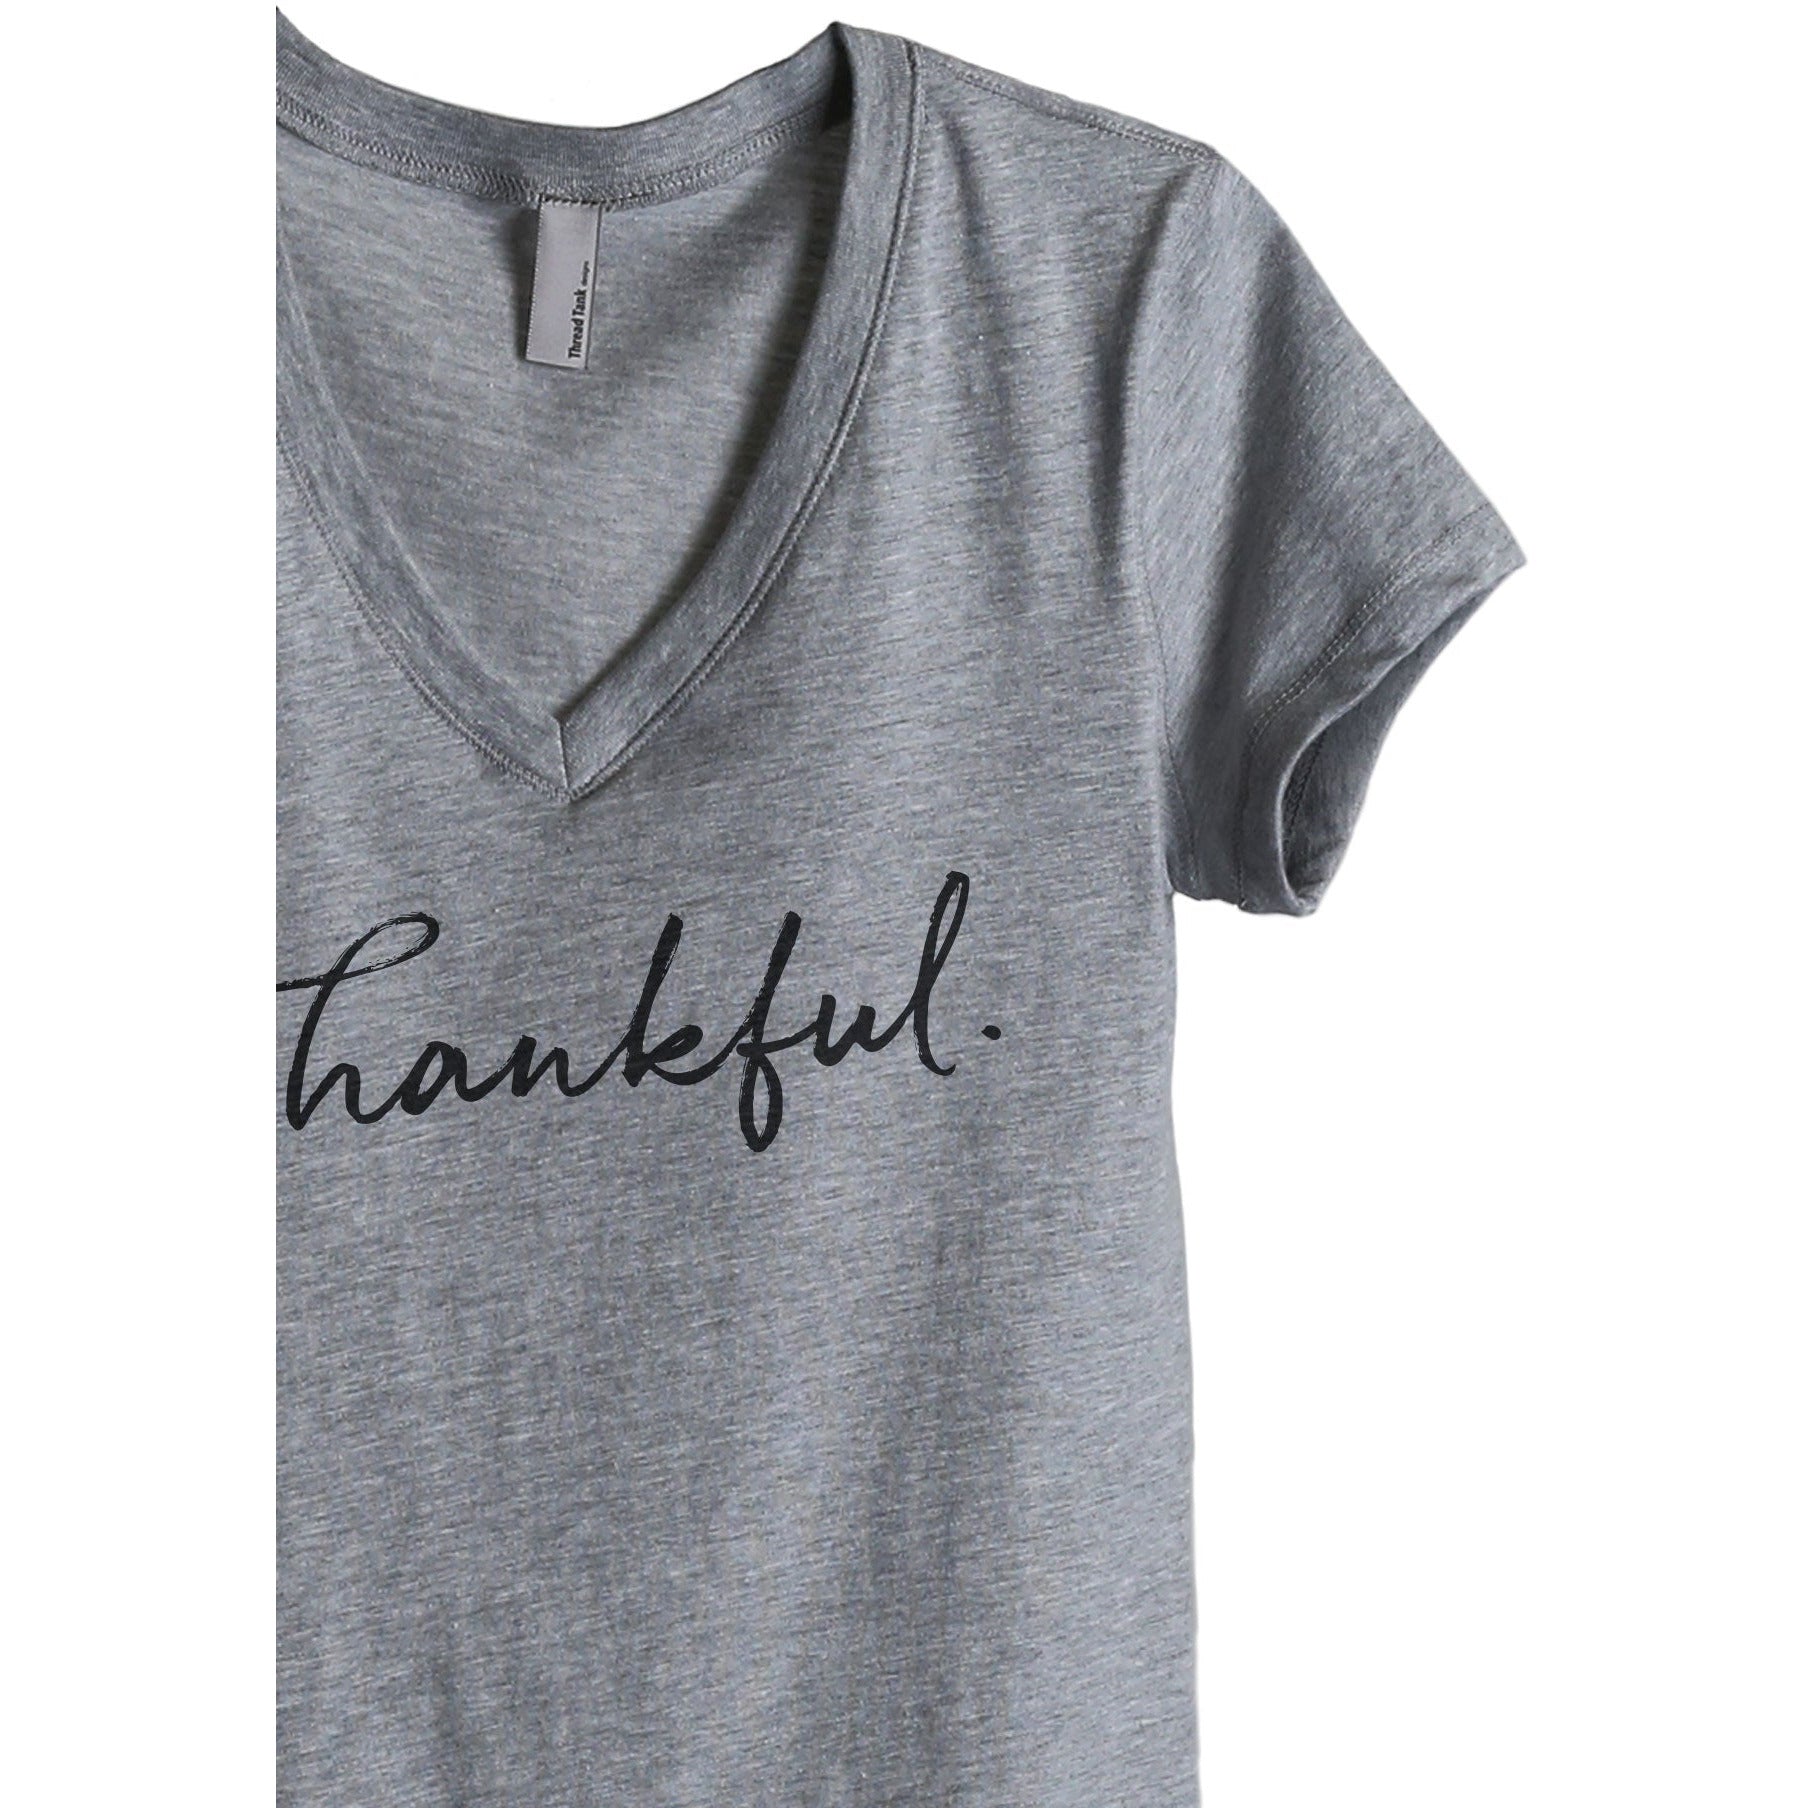 Thankful Cursive - Stories You Can Wear